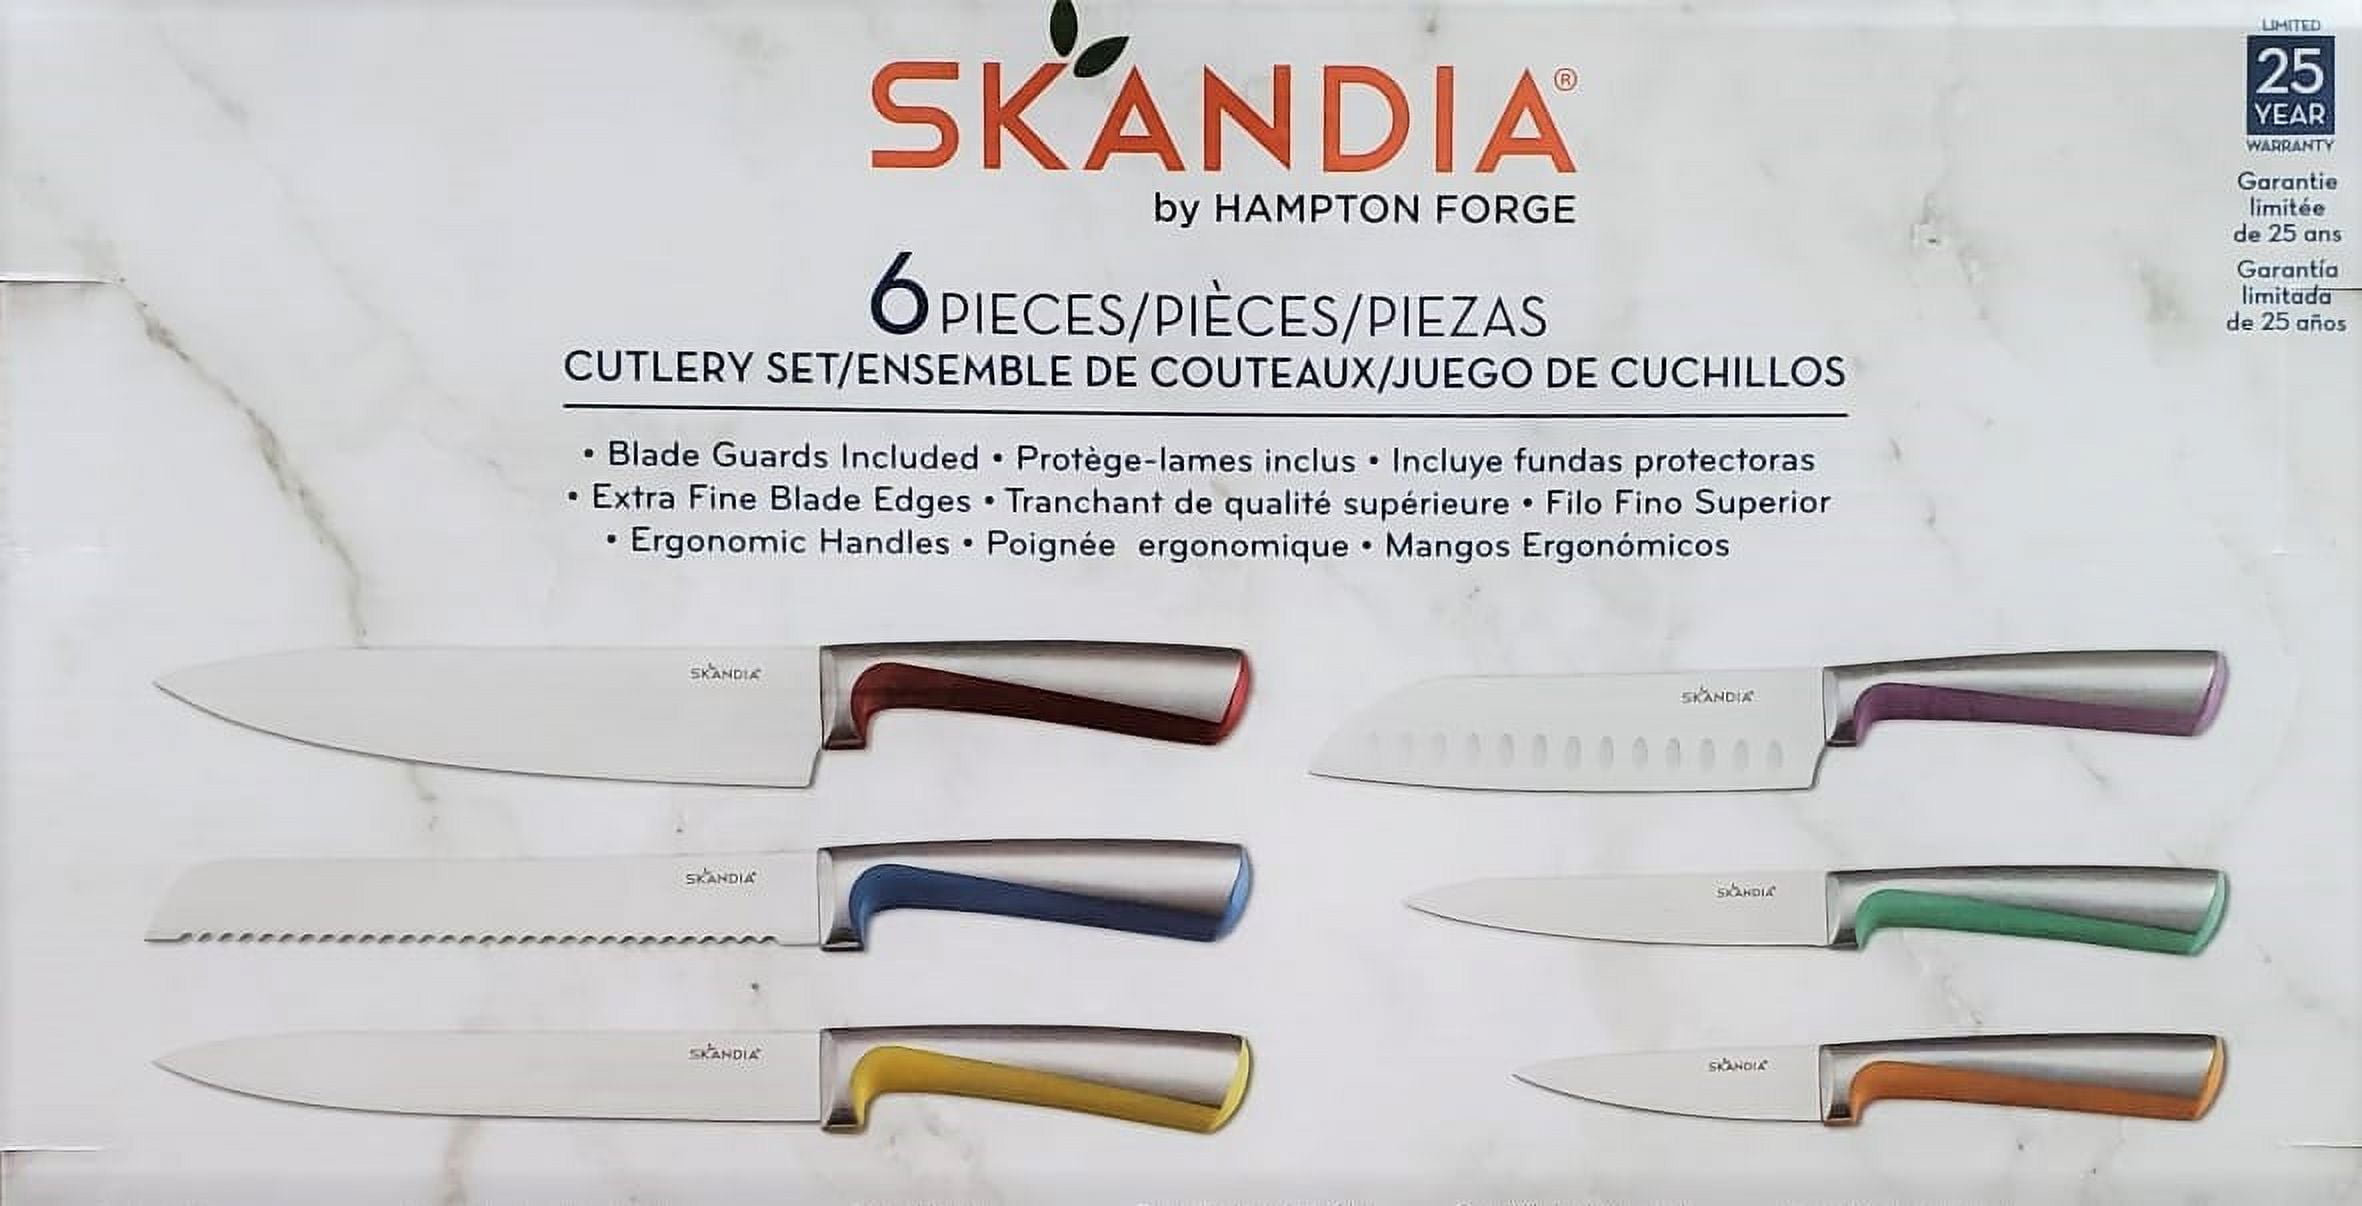 🚨NEW PRODUCT AT COSTCO🚨 🔪NEW Skandia 5-piece Cutlery Set with matching  Blade Guards are now available in @Costco warehouses nationwide for…